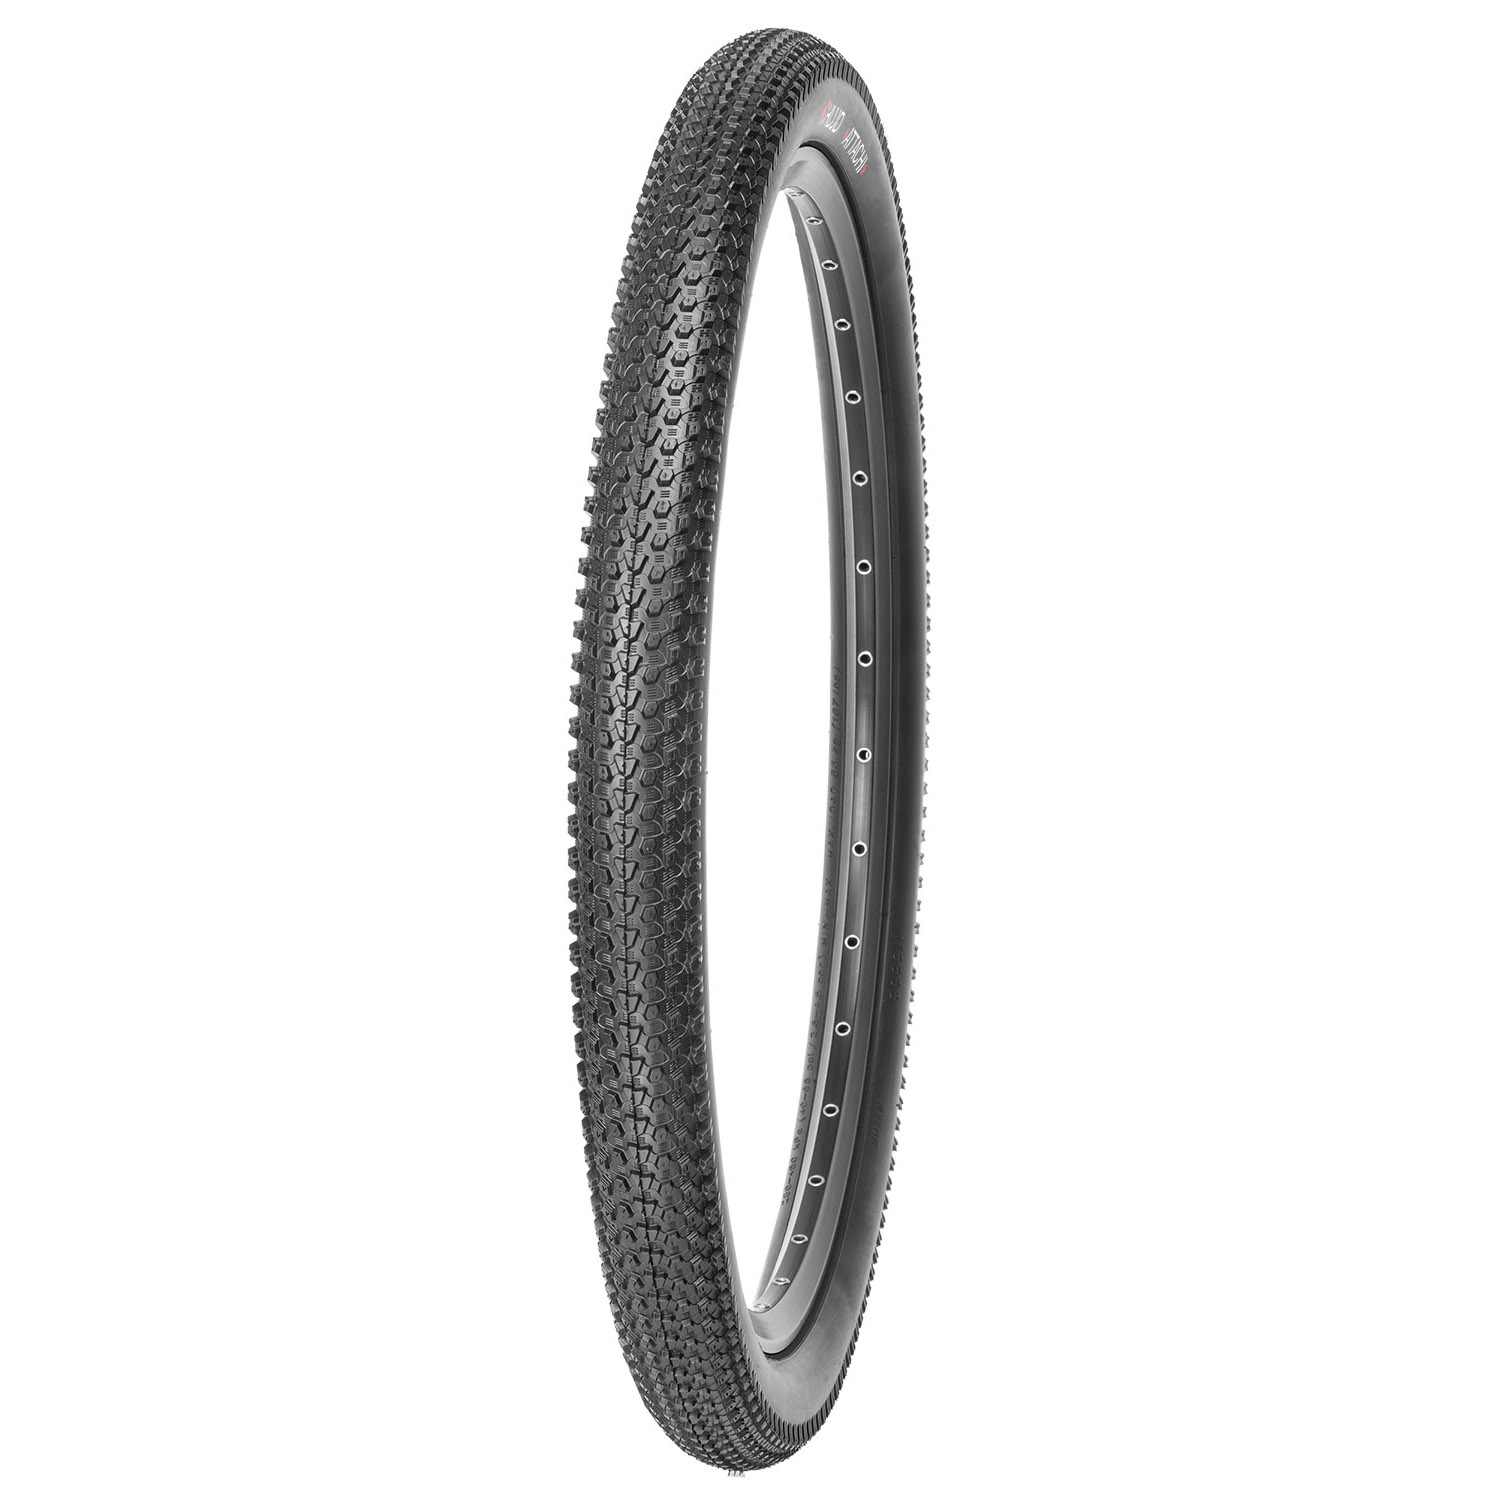 558061 – KUJO Attachi 26 x 2.10″ Clincher – AVAILABLE IN SELECTED BIKE SHOPS